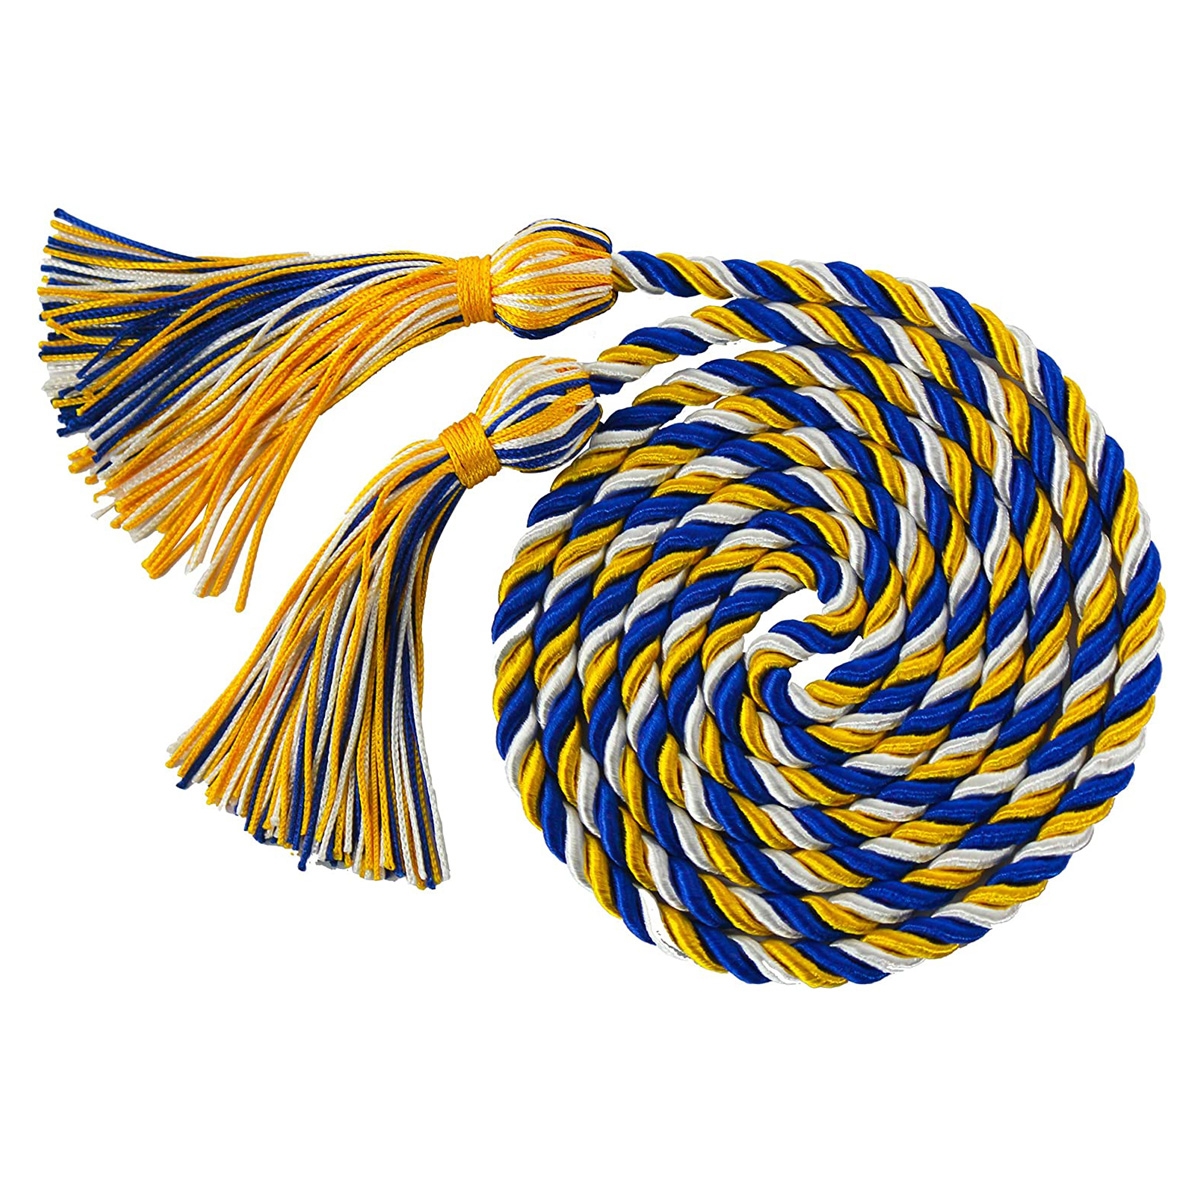 Graduation Mall Graduation Honor Cords 68  royal blue gold and white color tassel